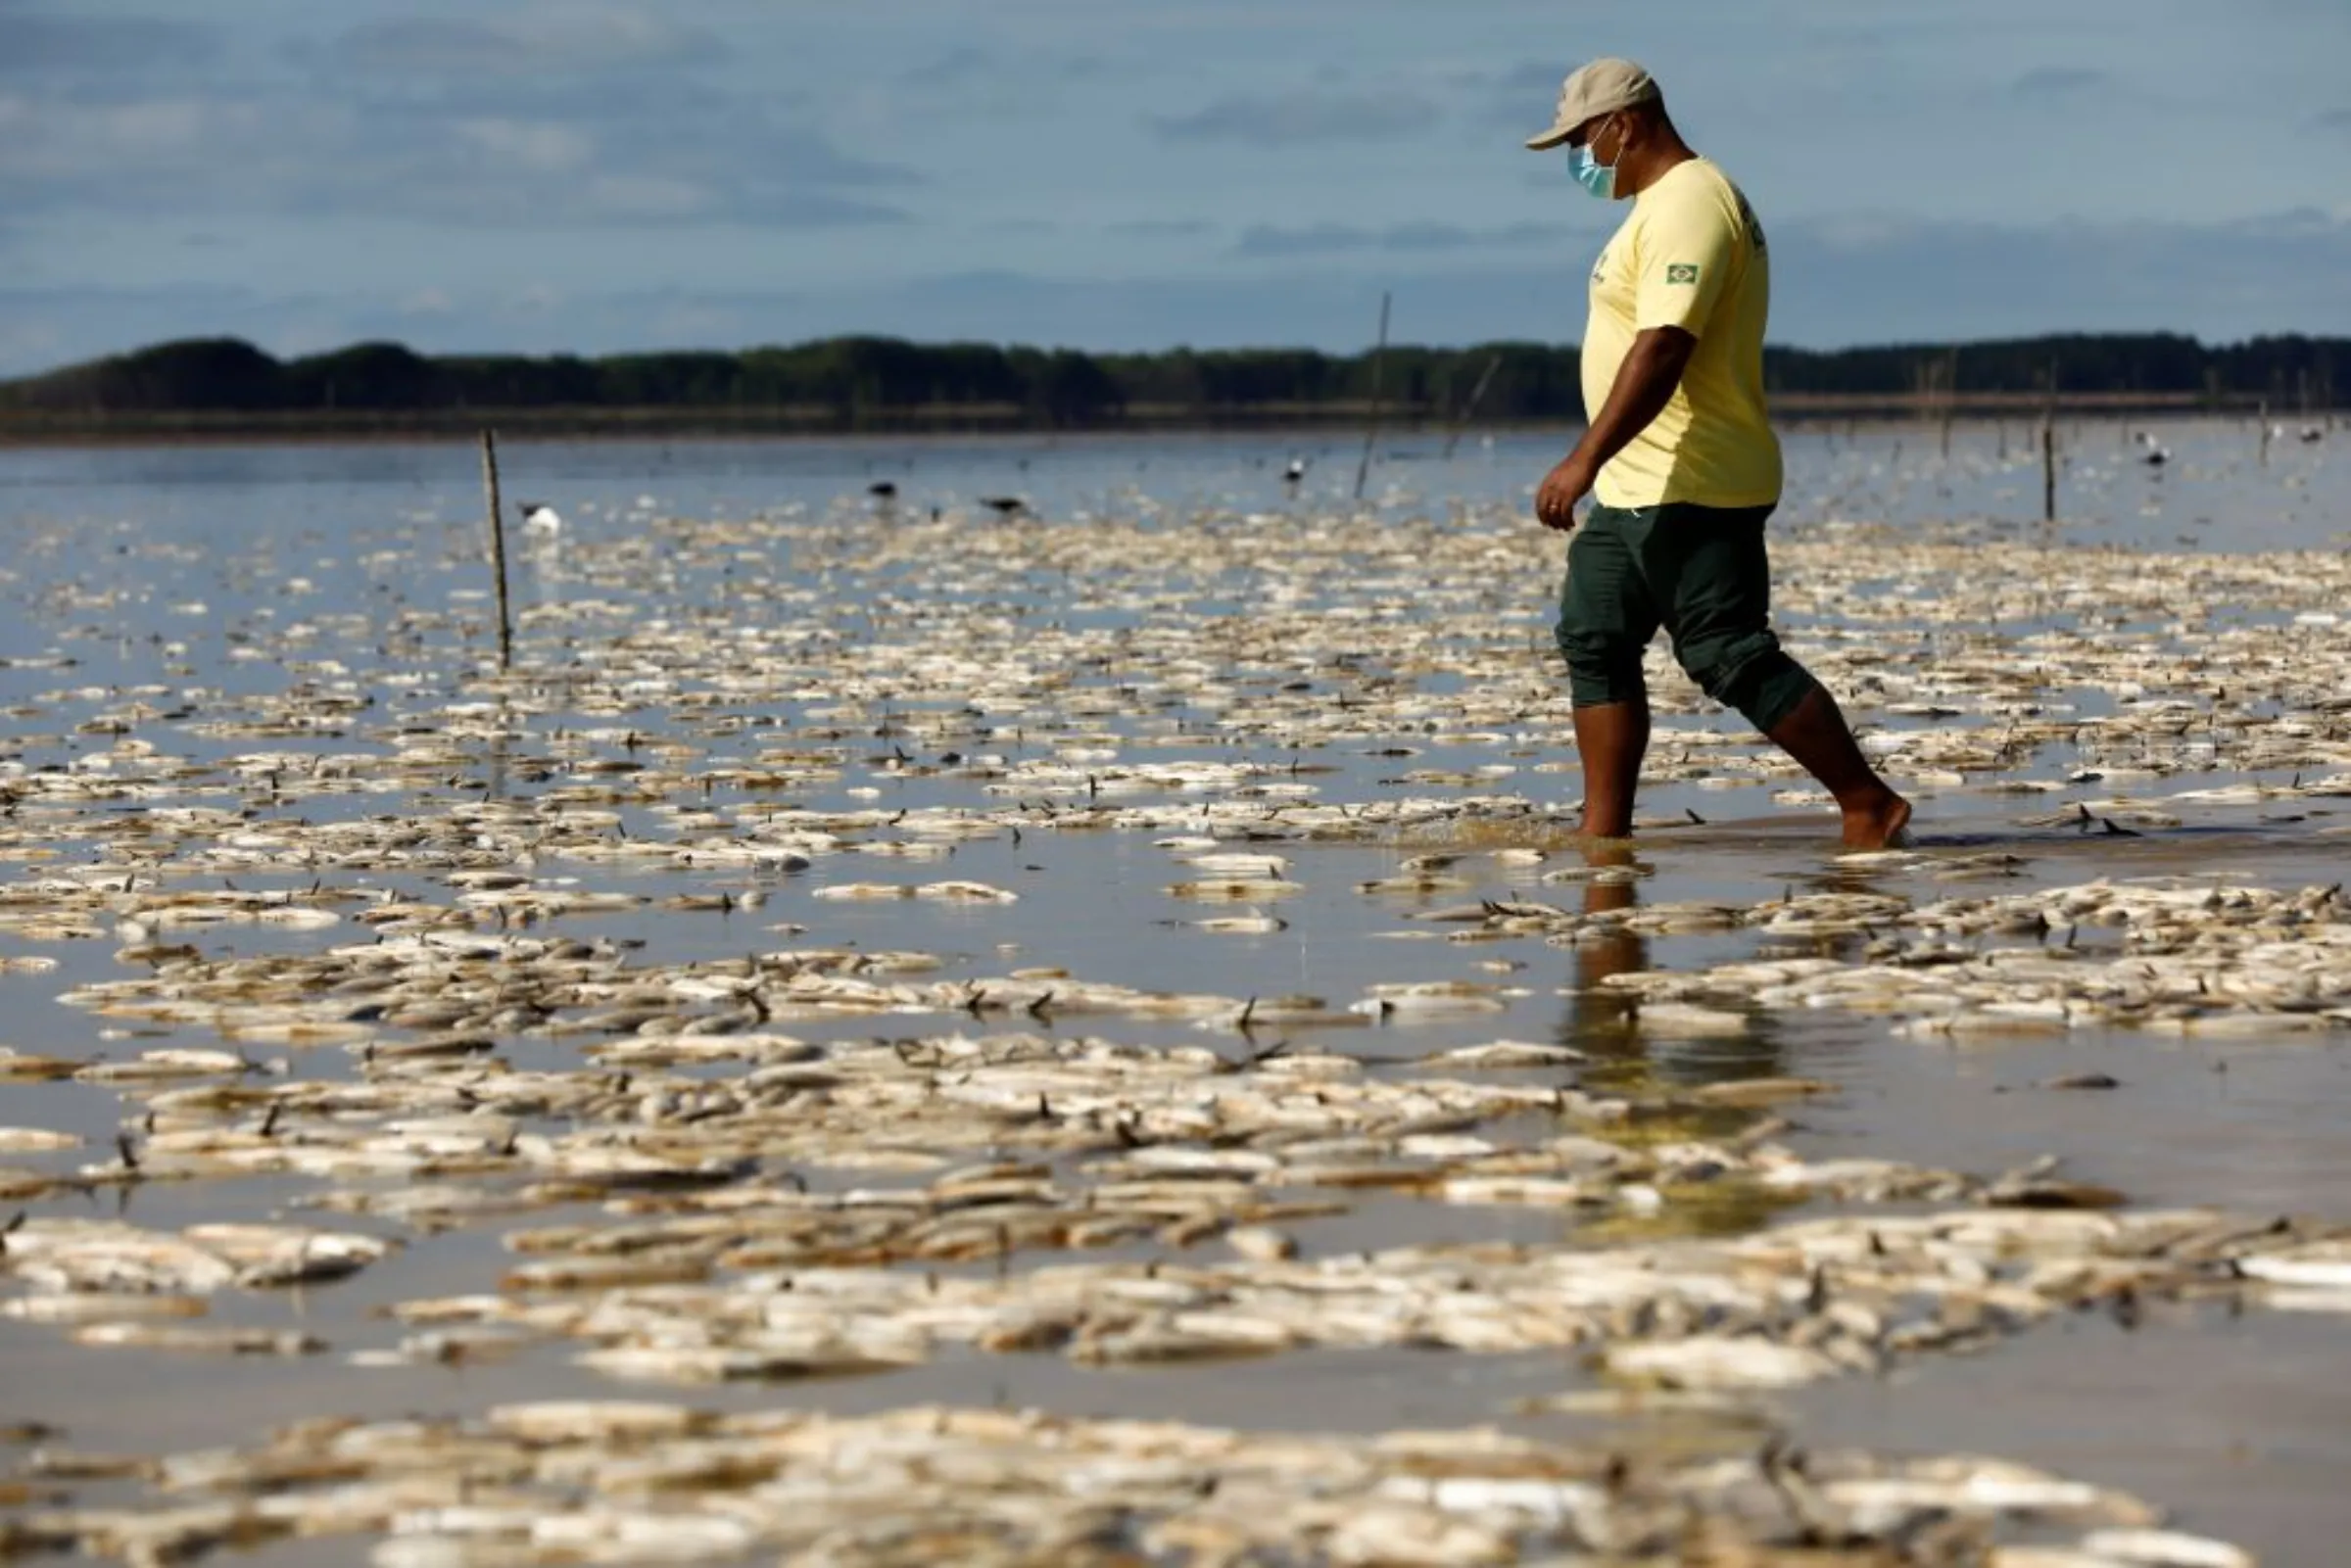 A member of the Chico Mendes Institute for Biodiversity Conservation (ICMBio) walks amid dead fish at Lagoa do Peixe (Fish Lagoon) which was affected by drought in Tavares, Rio Grande do Sul state, Brazil February 6, 2022